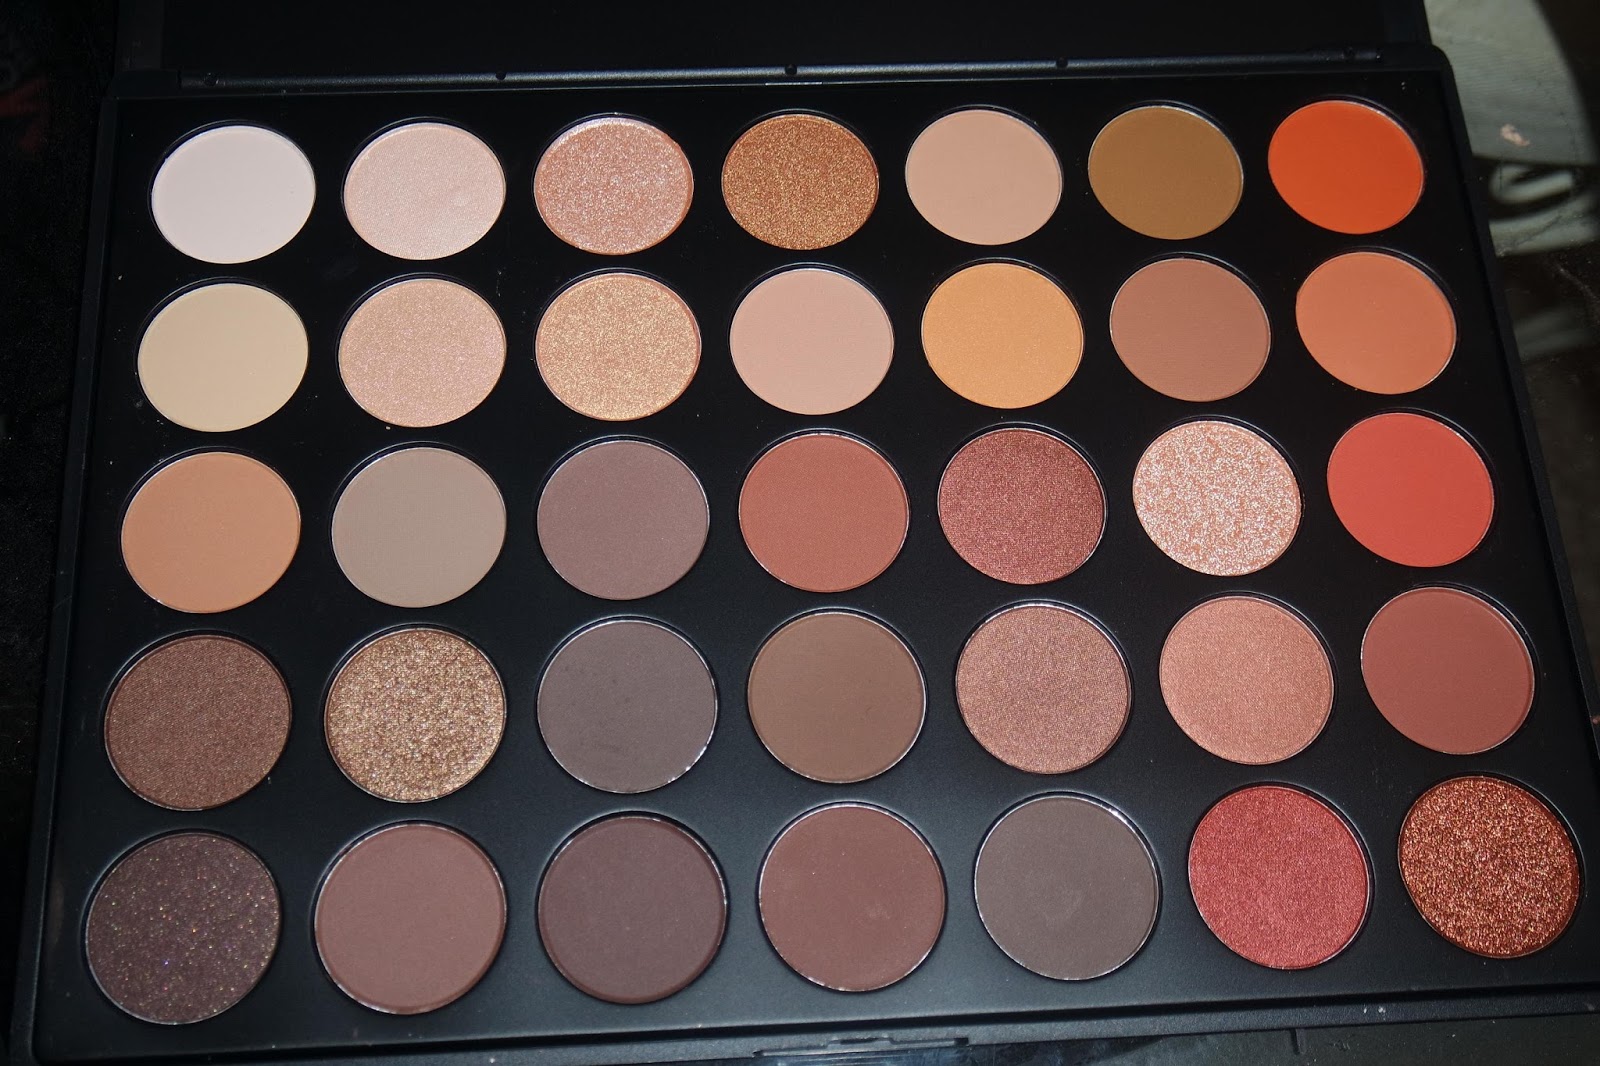 Makeup by - Beauty Blog: Morphe Brushes 35O - 35 COLOR GLOW EYESHADOW PALETTE & Swatches!